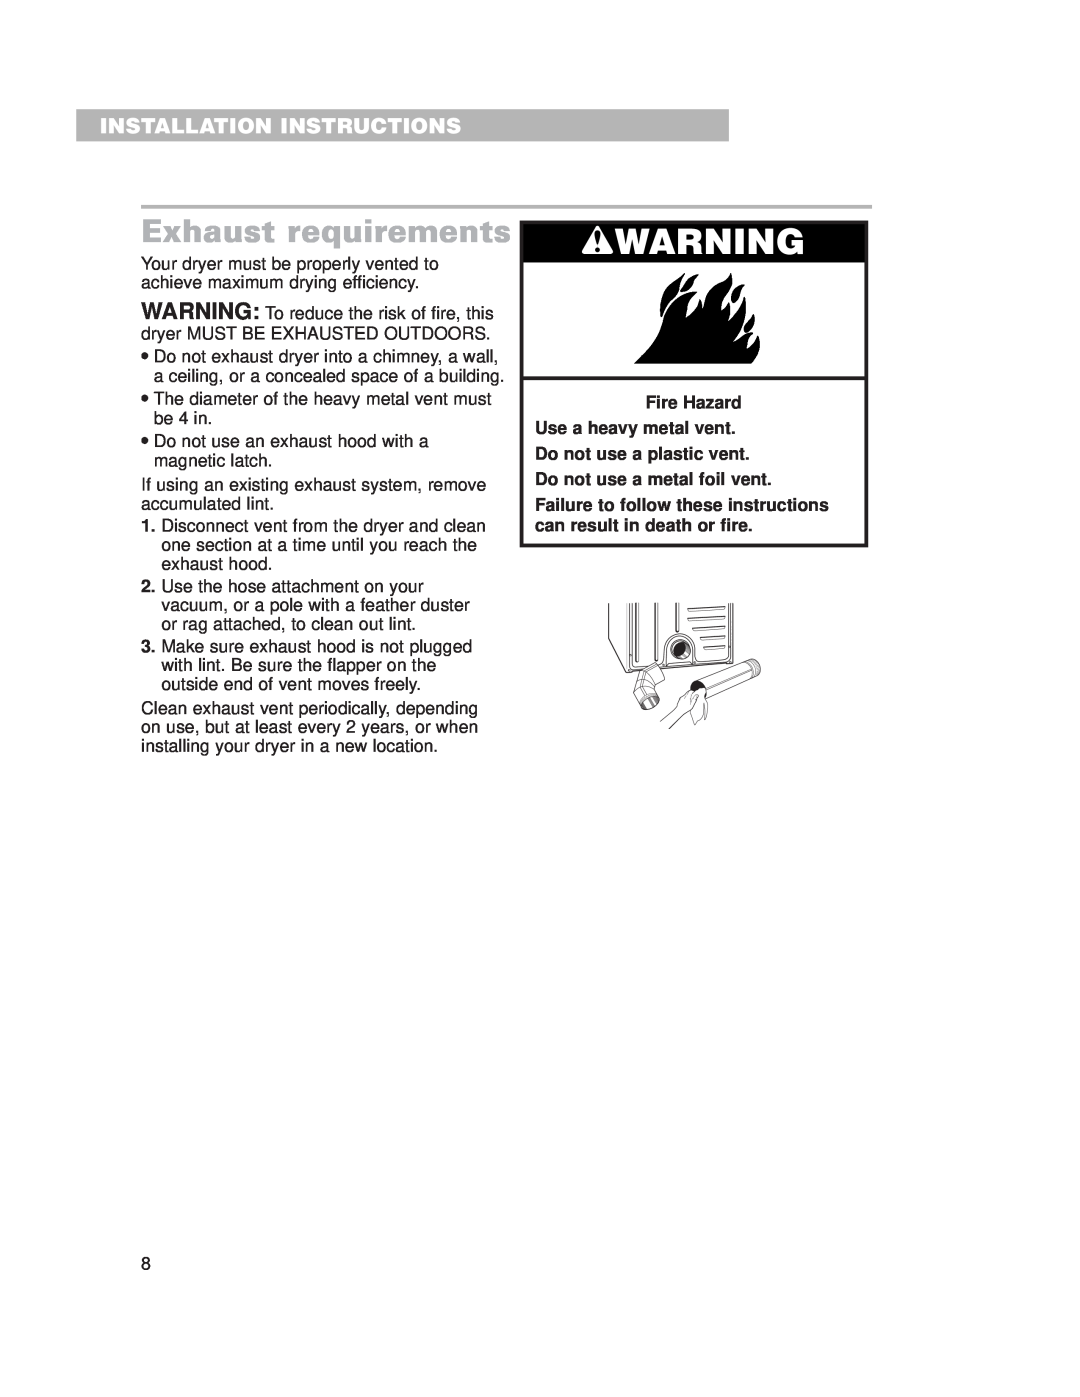 Whirlpool 3977631 Exhaust requirements, wWARNING, Installation Instructions, Do not use a metal foil vent 